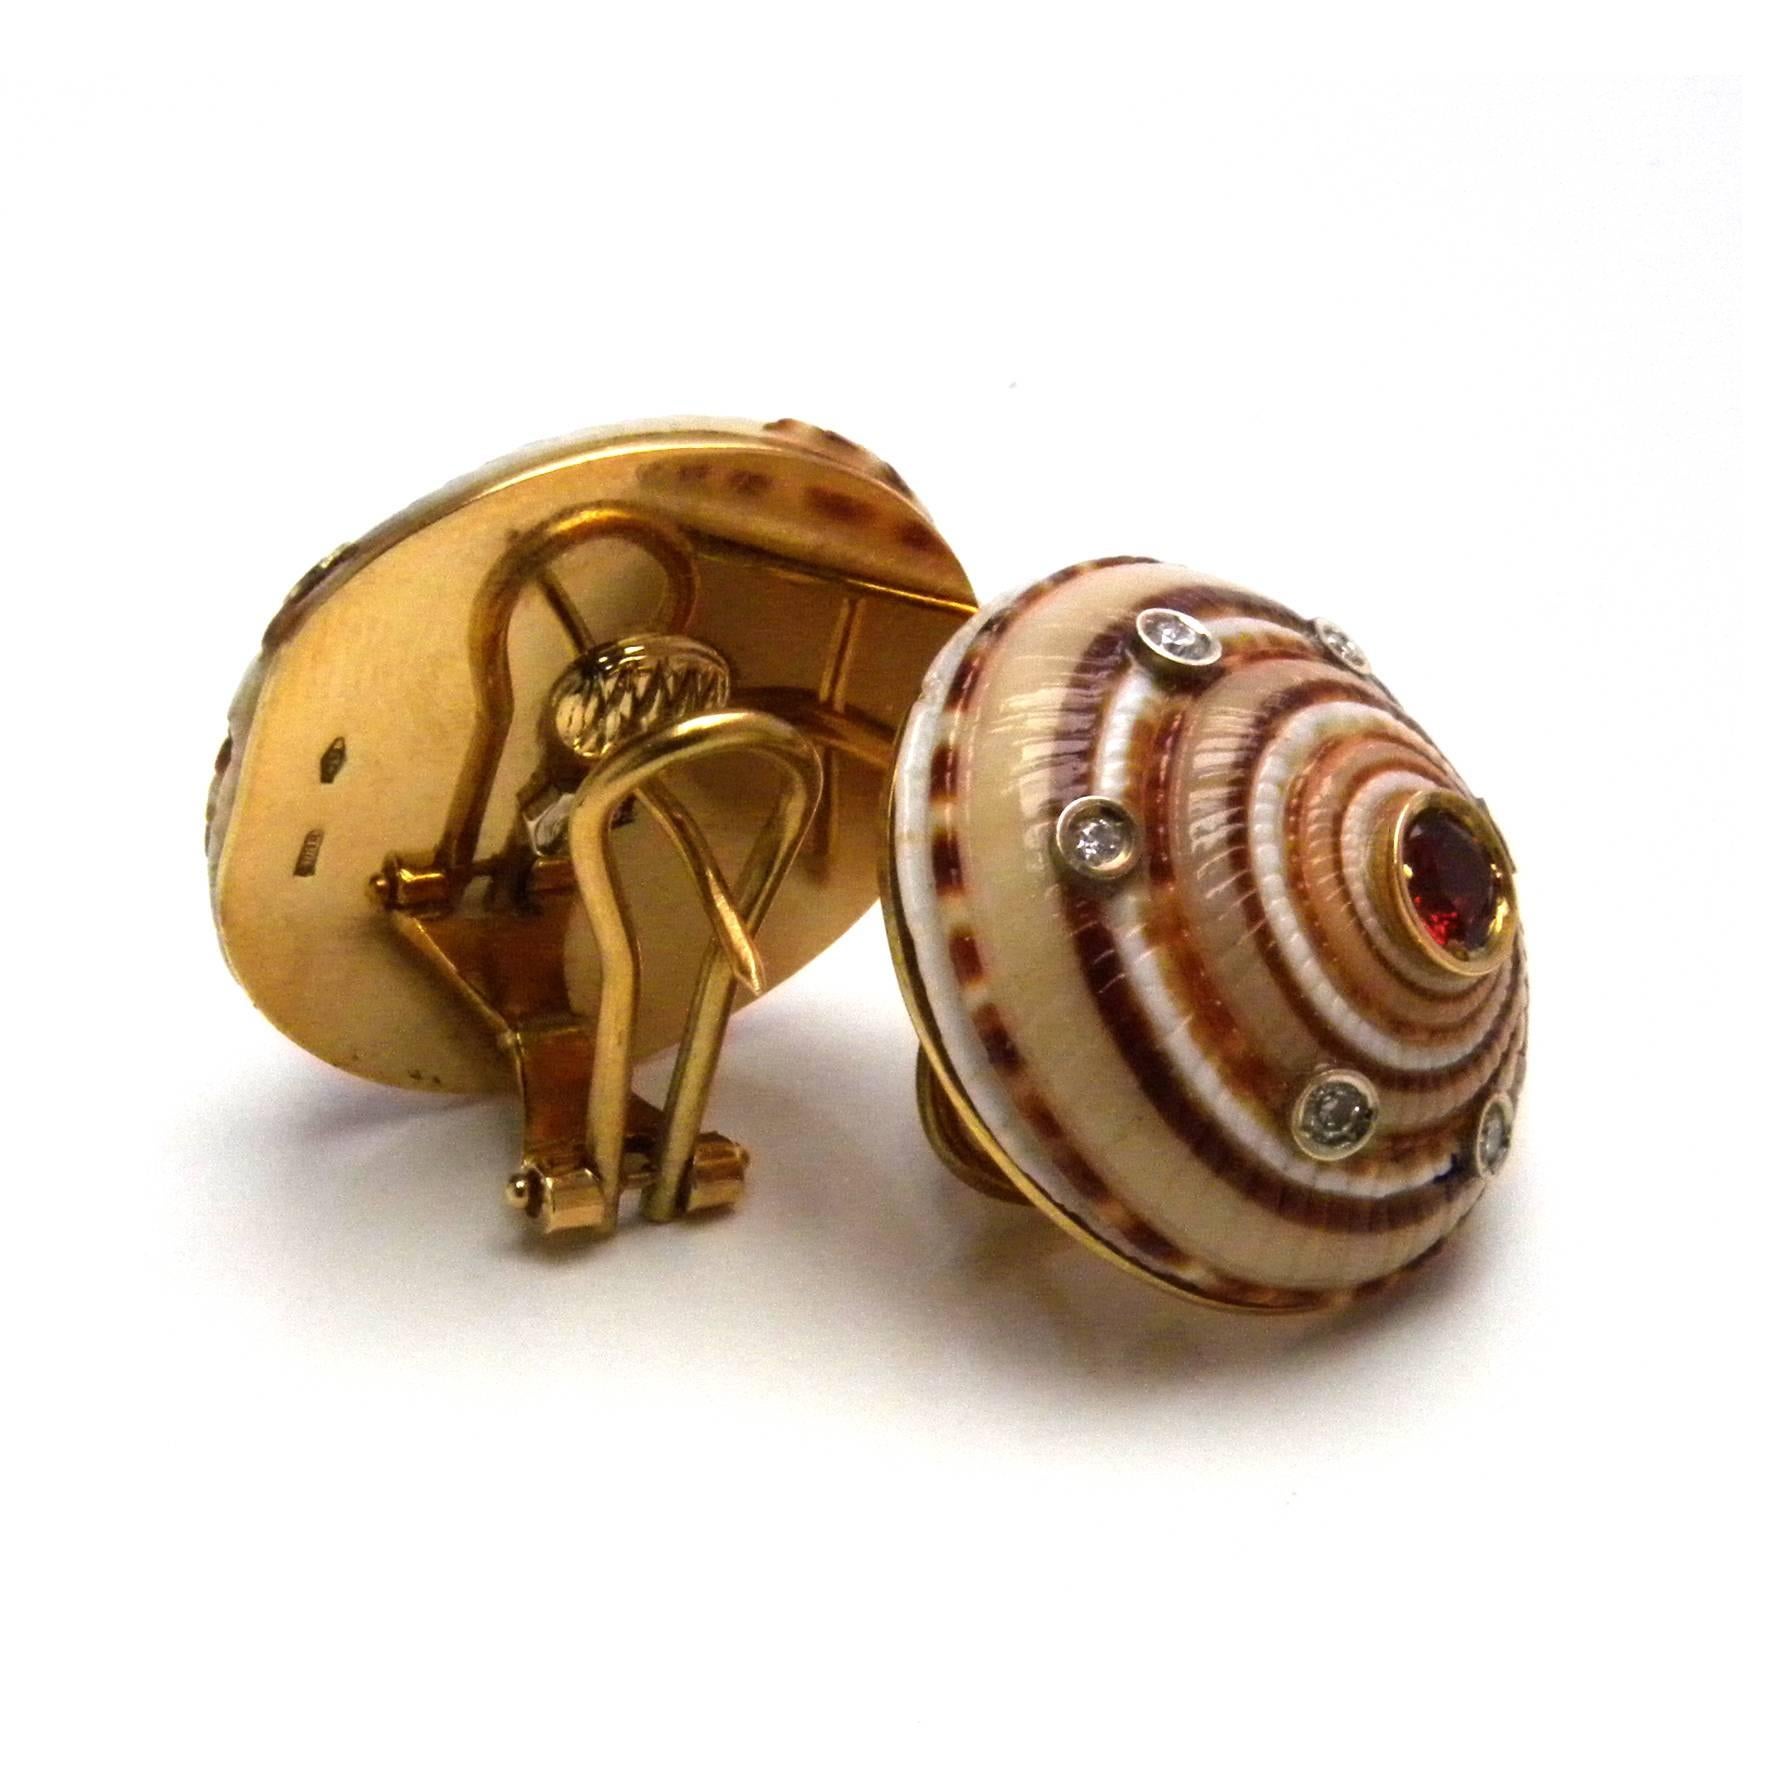 Unique seashells earrings with a 18kt Yellow gold back, set with round red tourmalines(0.8kt) and White diamonds(0.19kt).

Complimentary import tax and duties for Europe and US shipments.